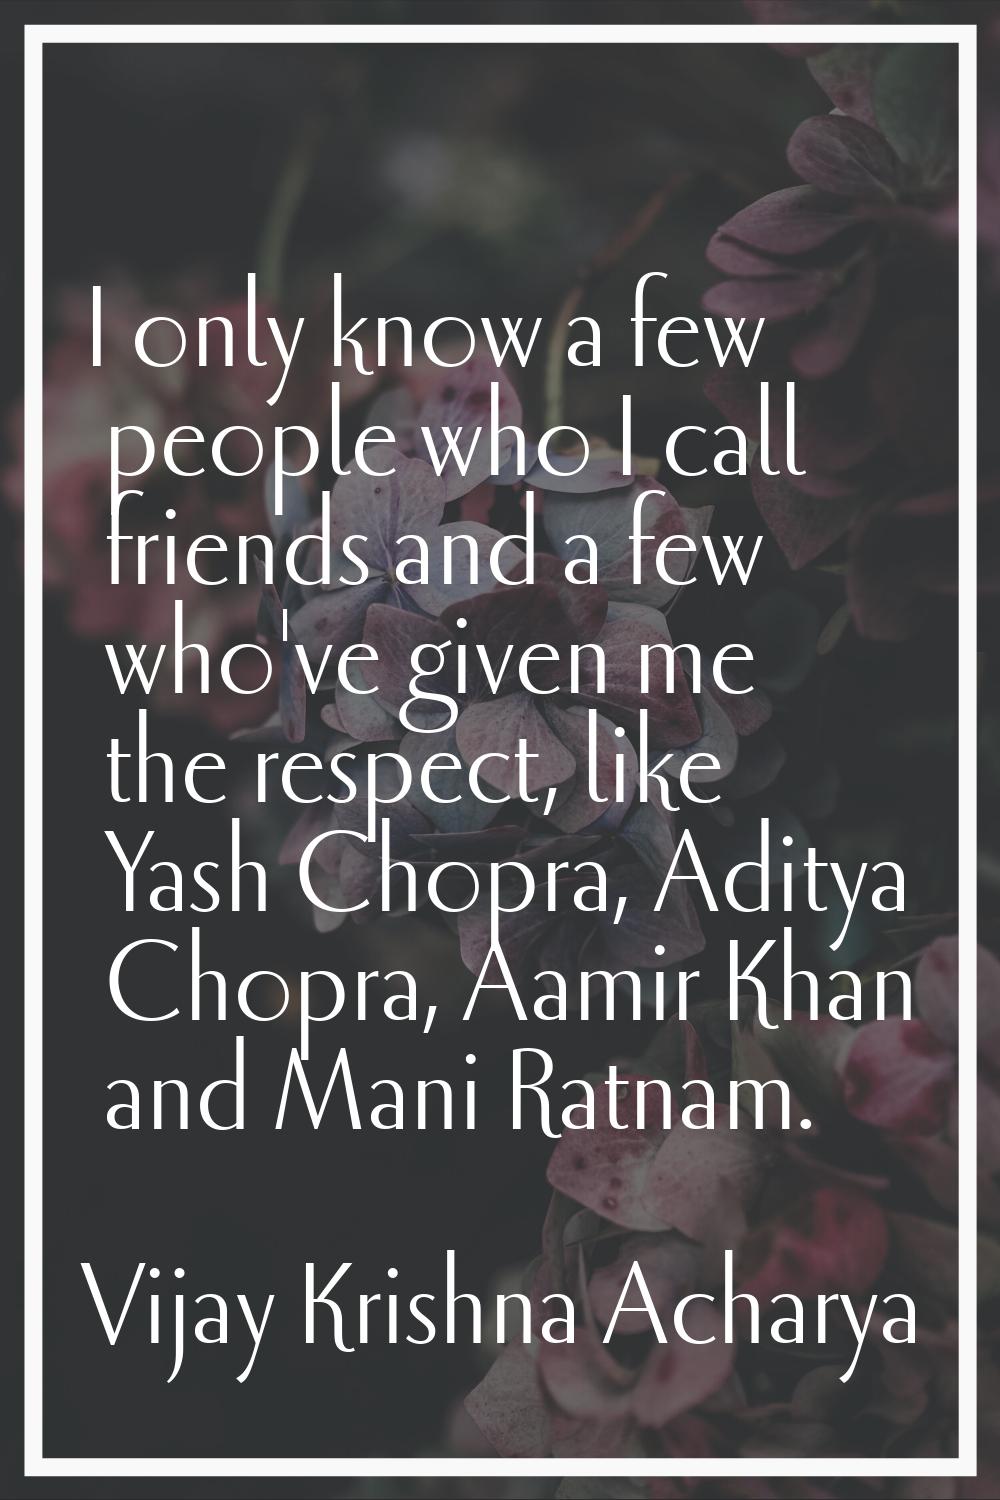 I only know a few people who I call friends and a few who've given me the respect, like Yash Chopra